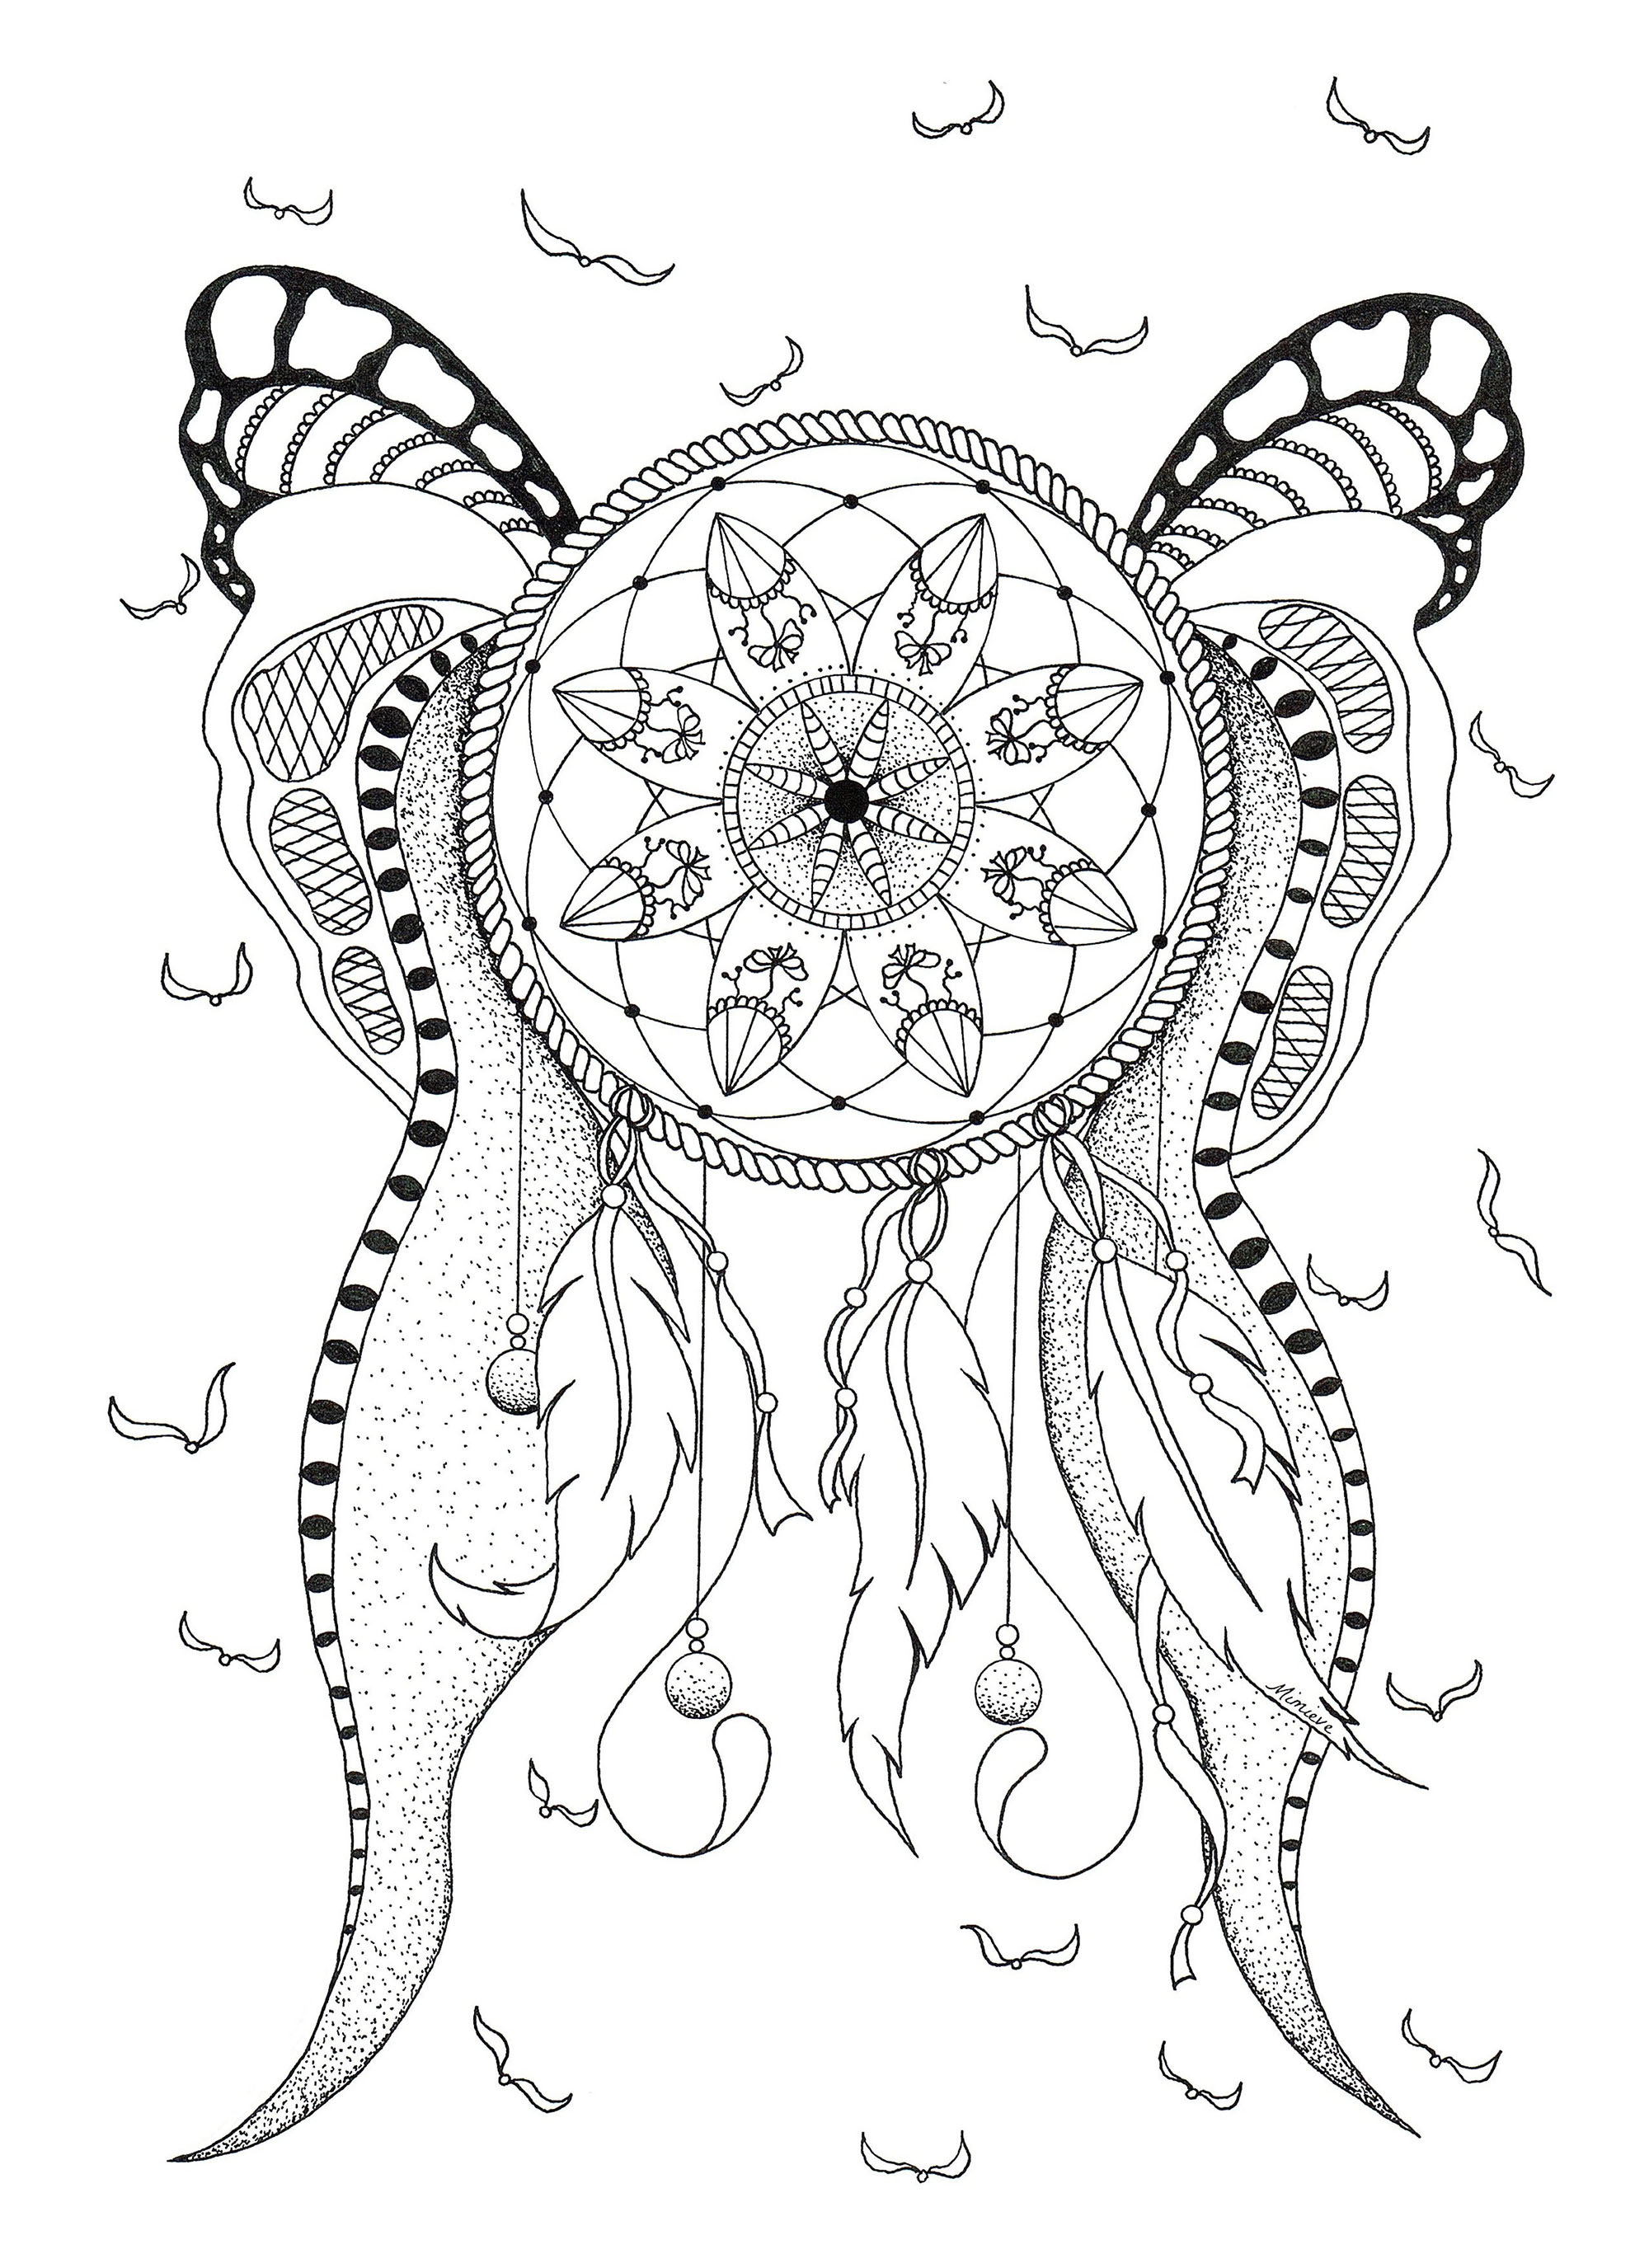 417 Animal Dream Catcher Coloring Pages with Printable